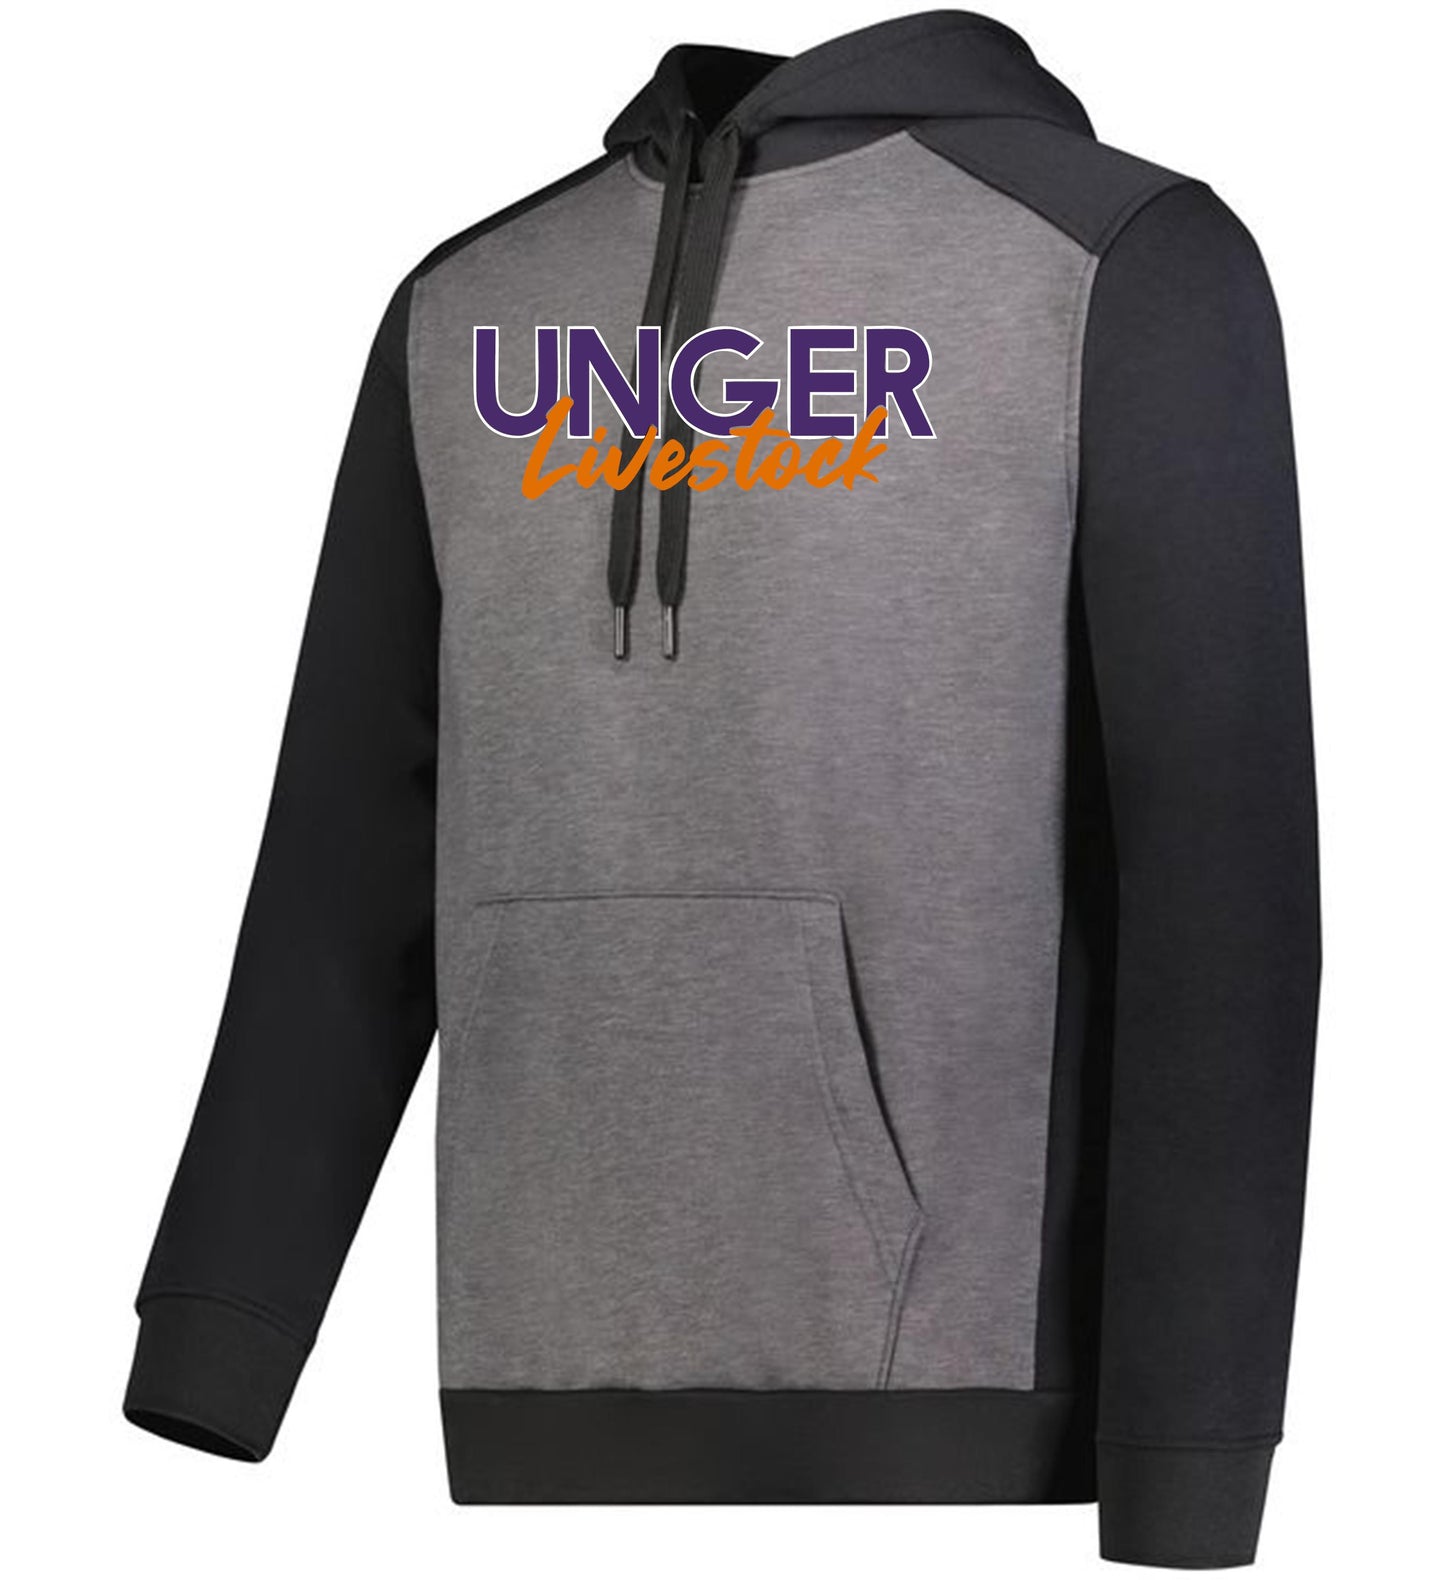 Holloway Three Seasons Hoodie - Adult & Youth (Unger)